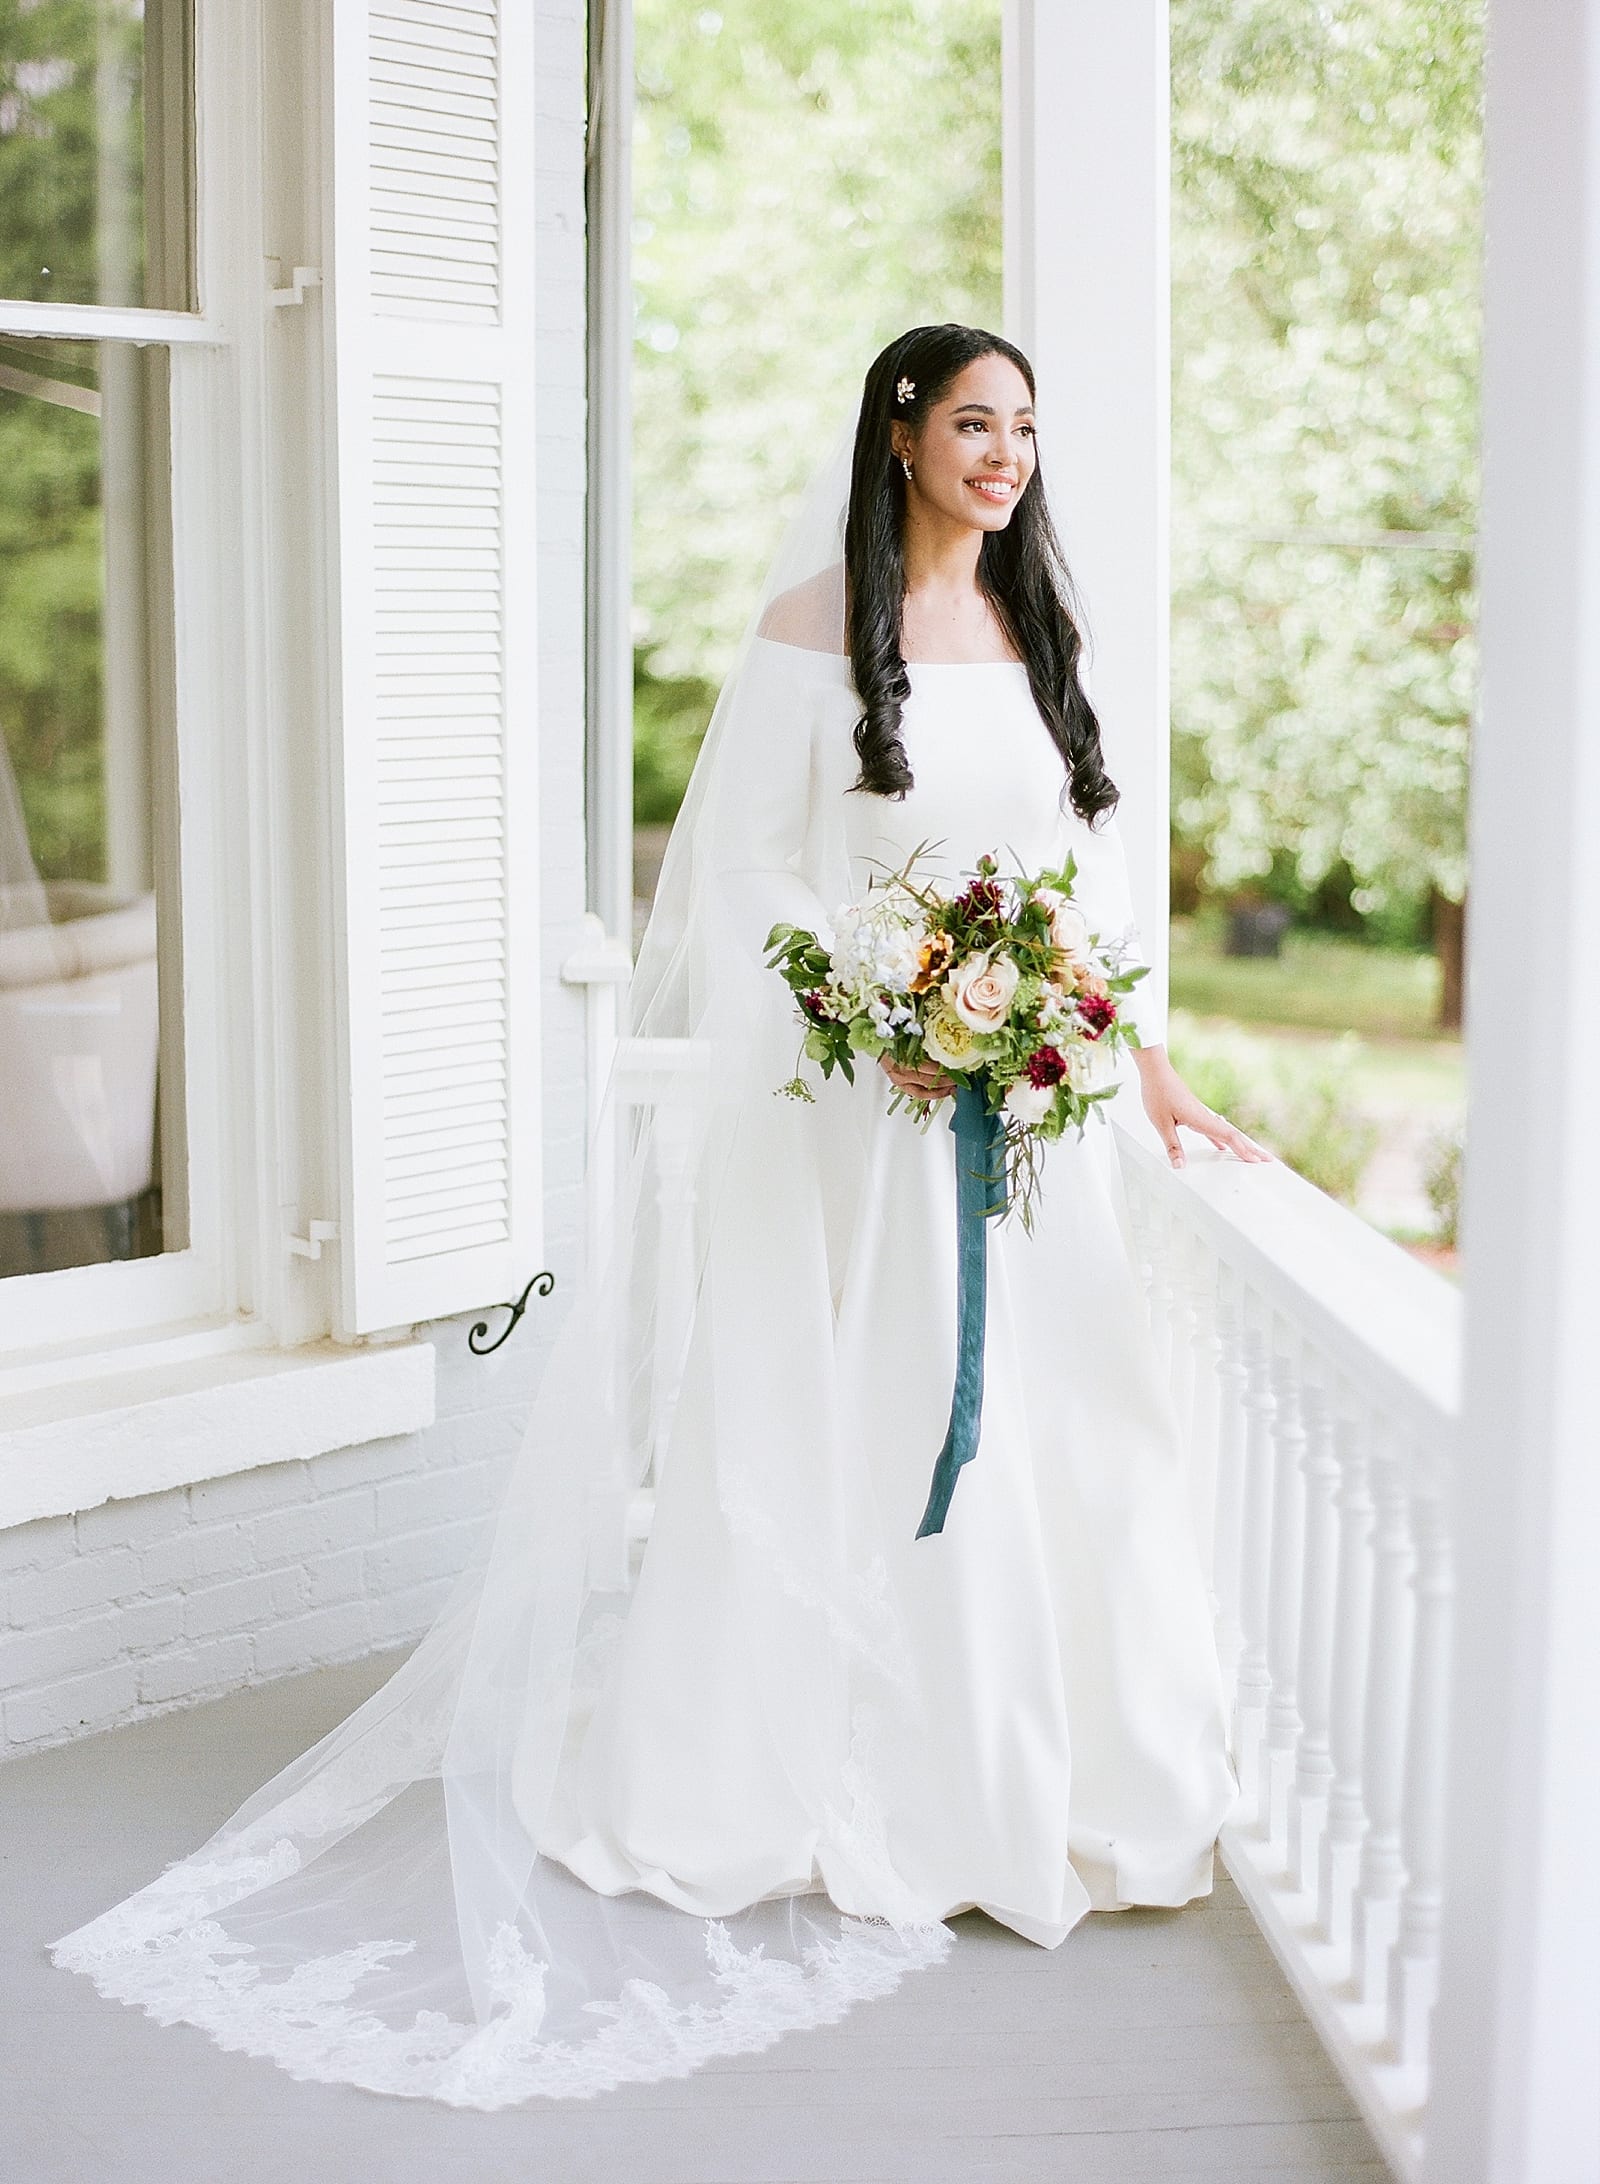 McAlister Leftwich House Wedding Bride Smiling on Porch Photo